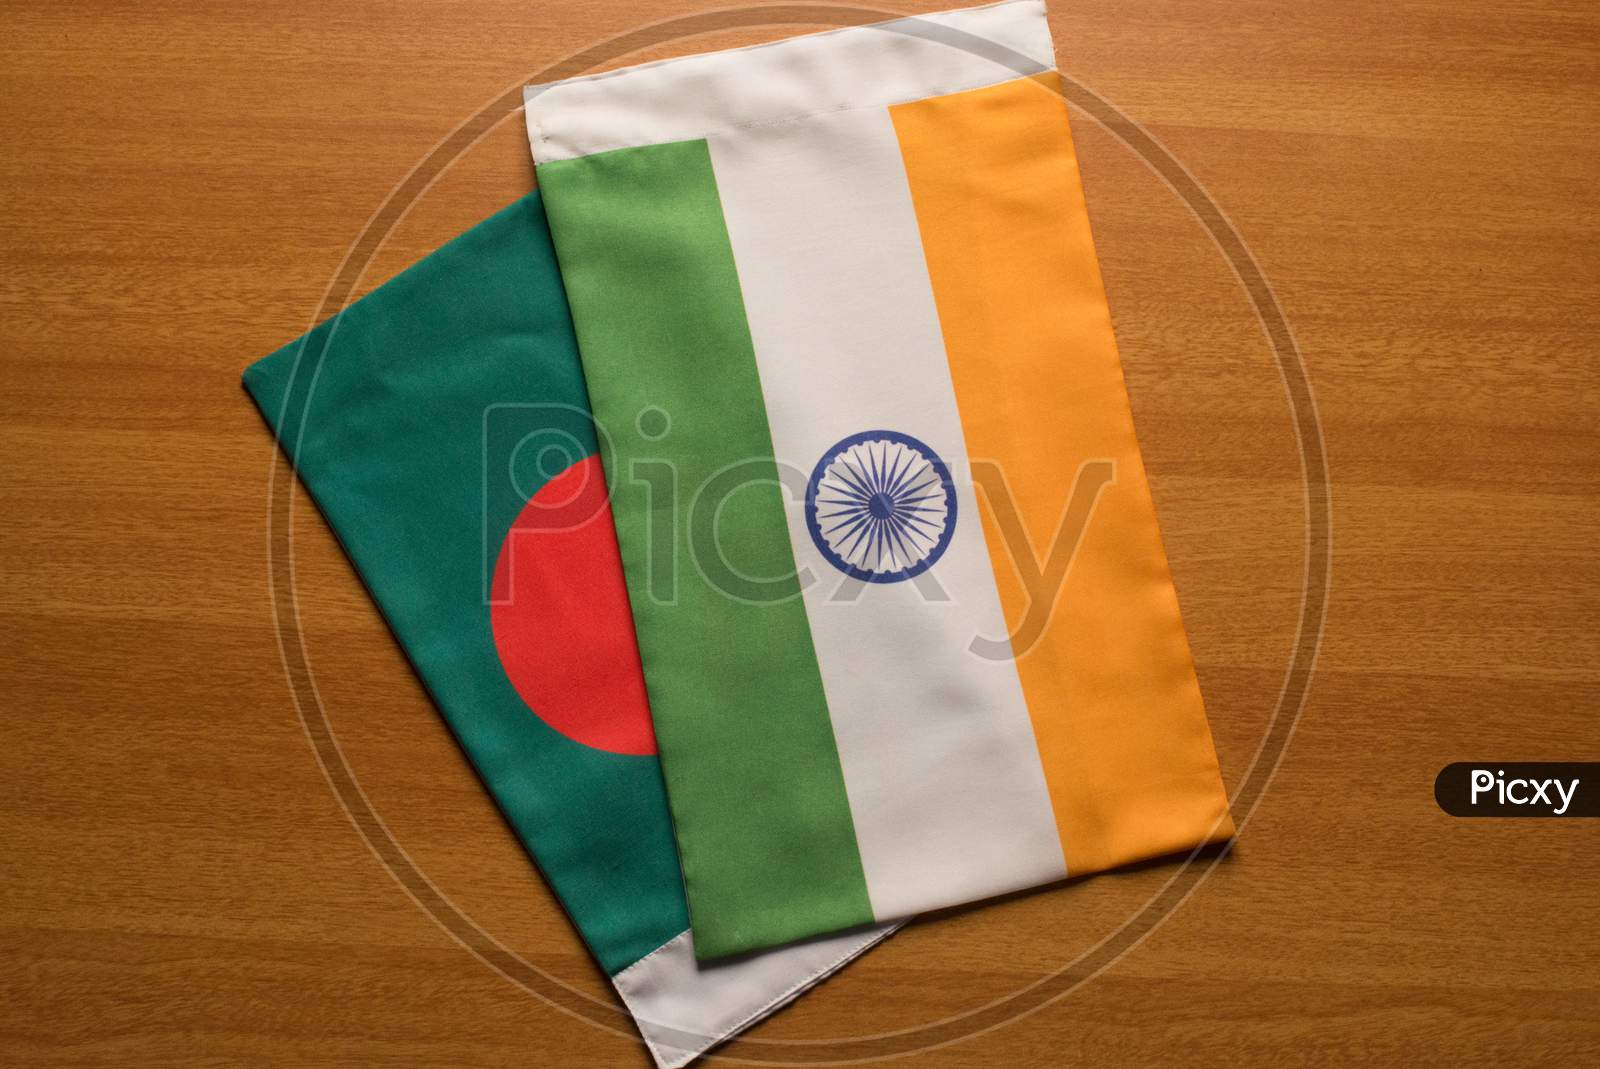 Bangladesh And Indian Flags Placed On Table.